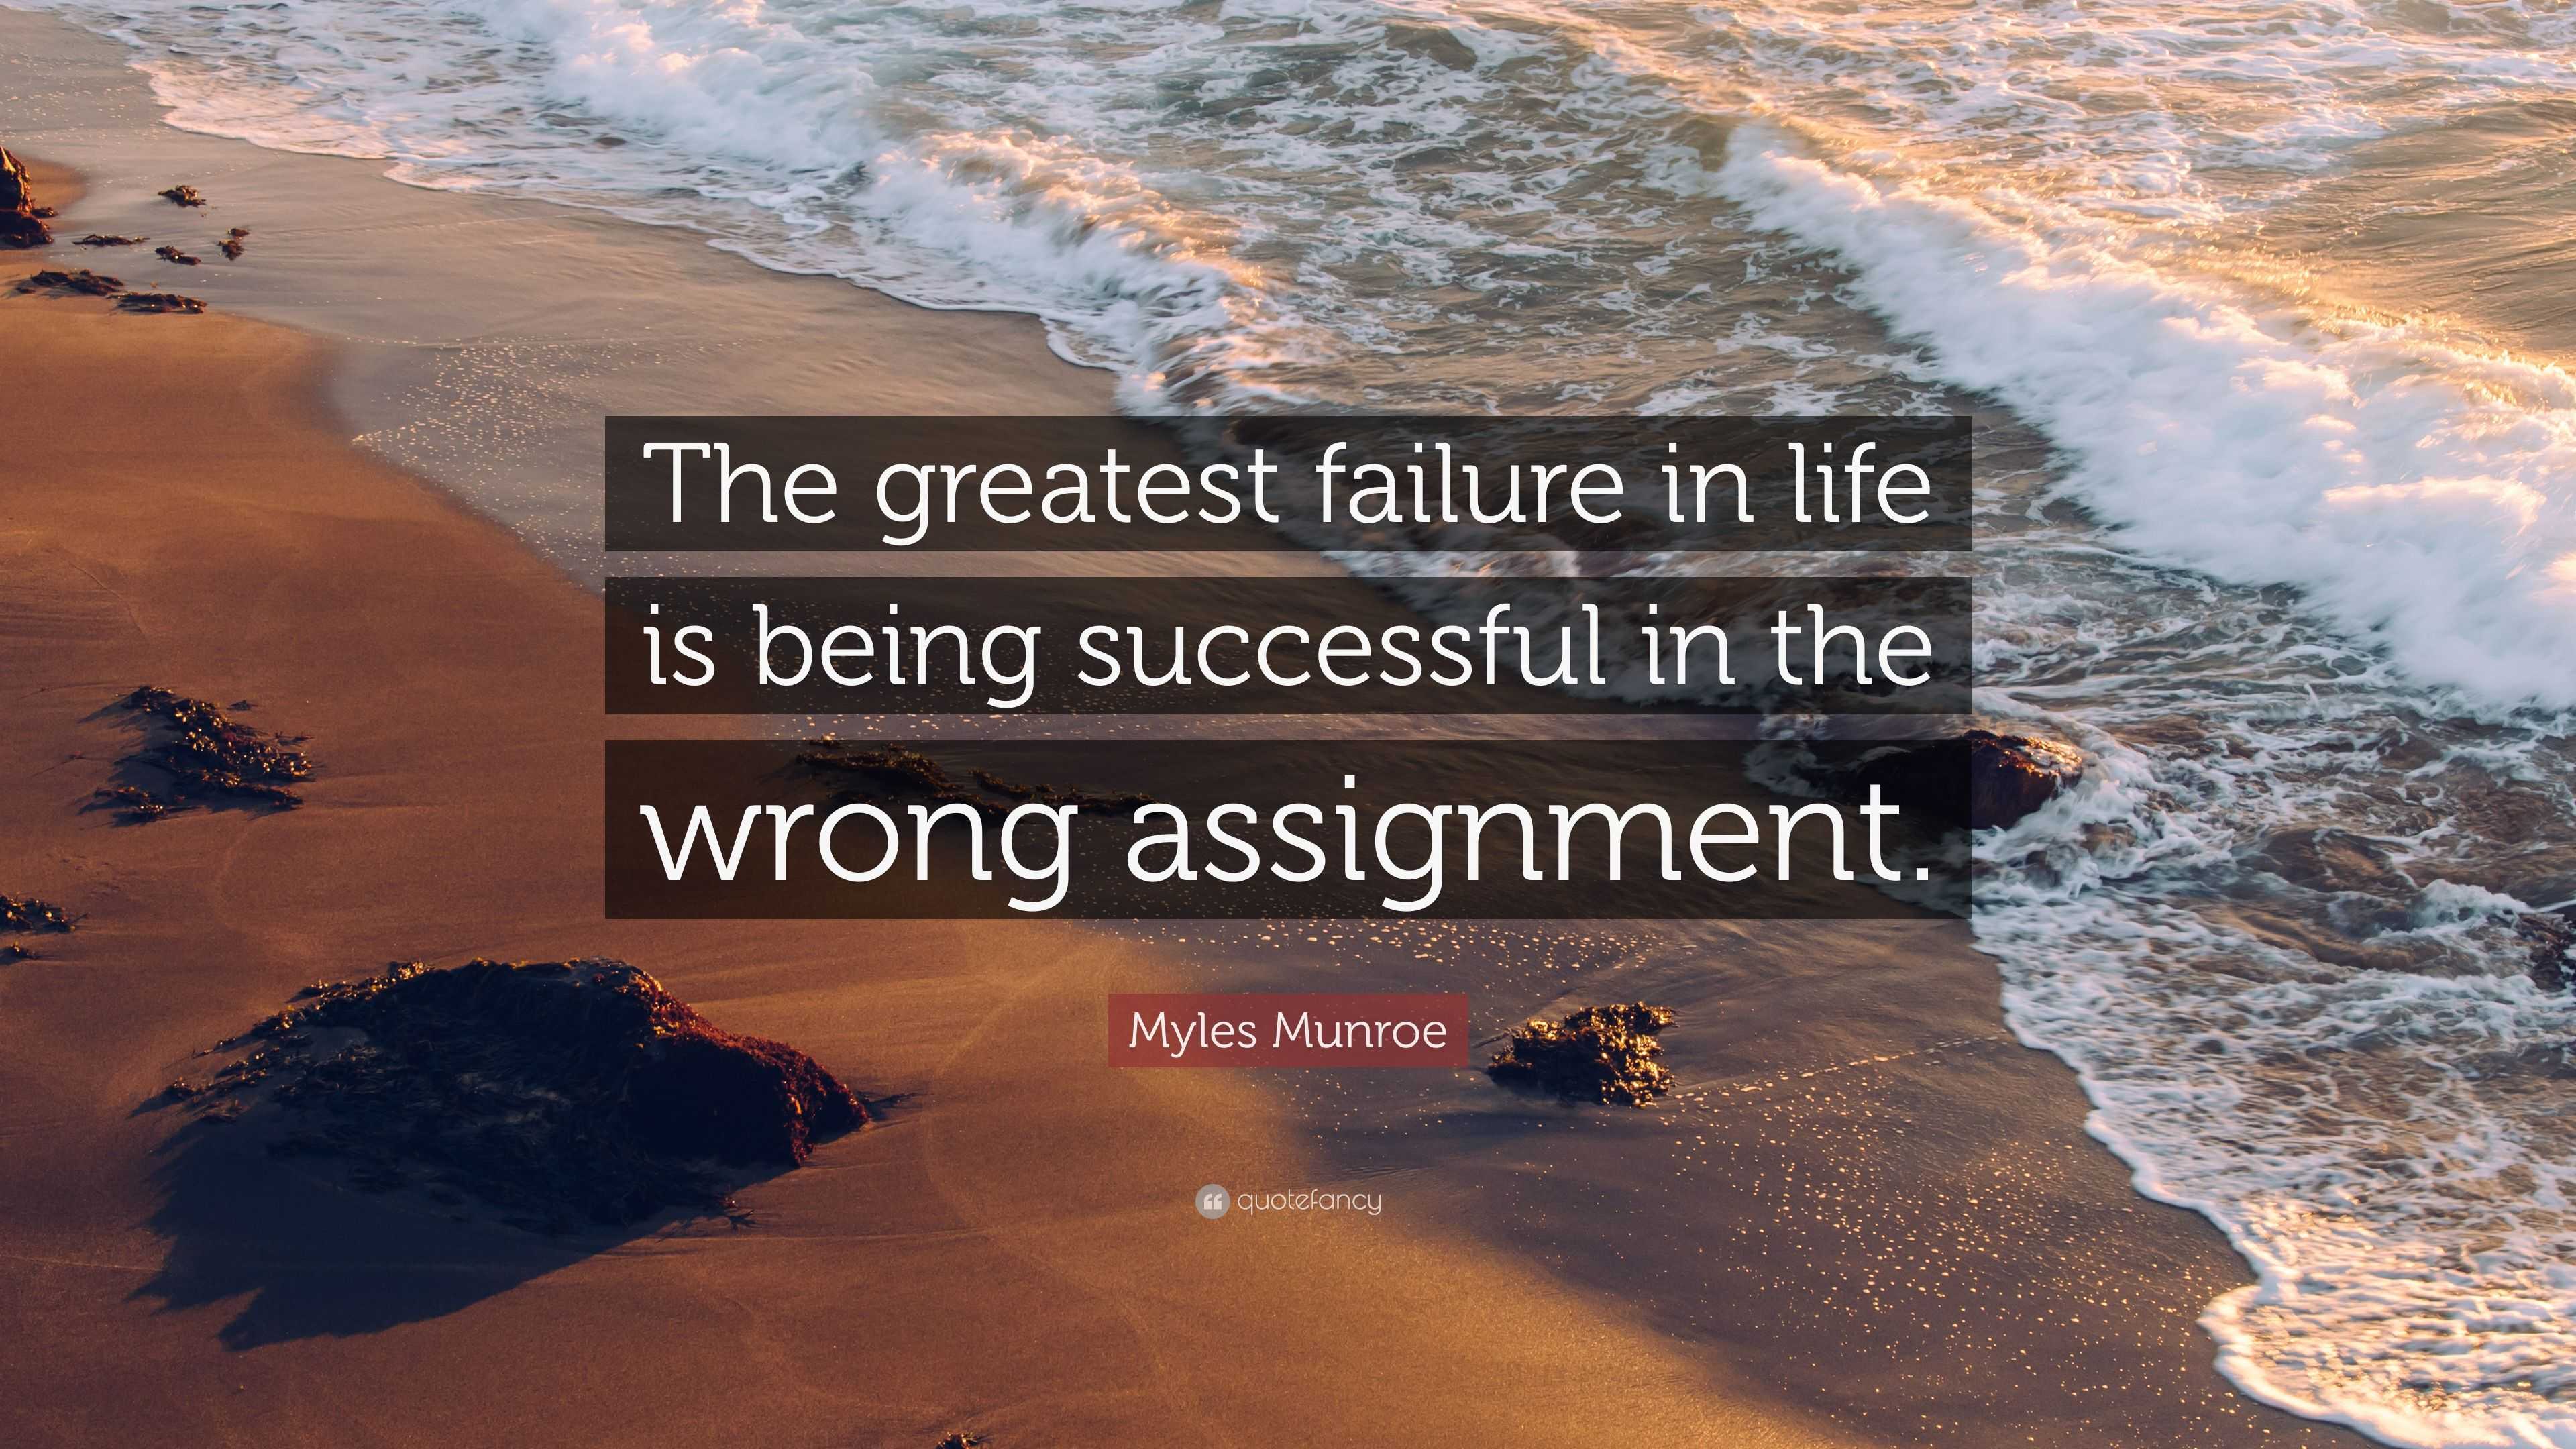 2494551 Myles Munroe Quote The greatest failure in life is being